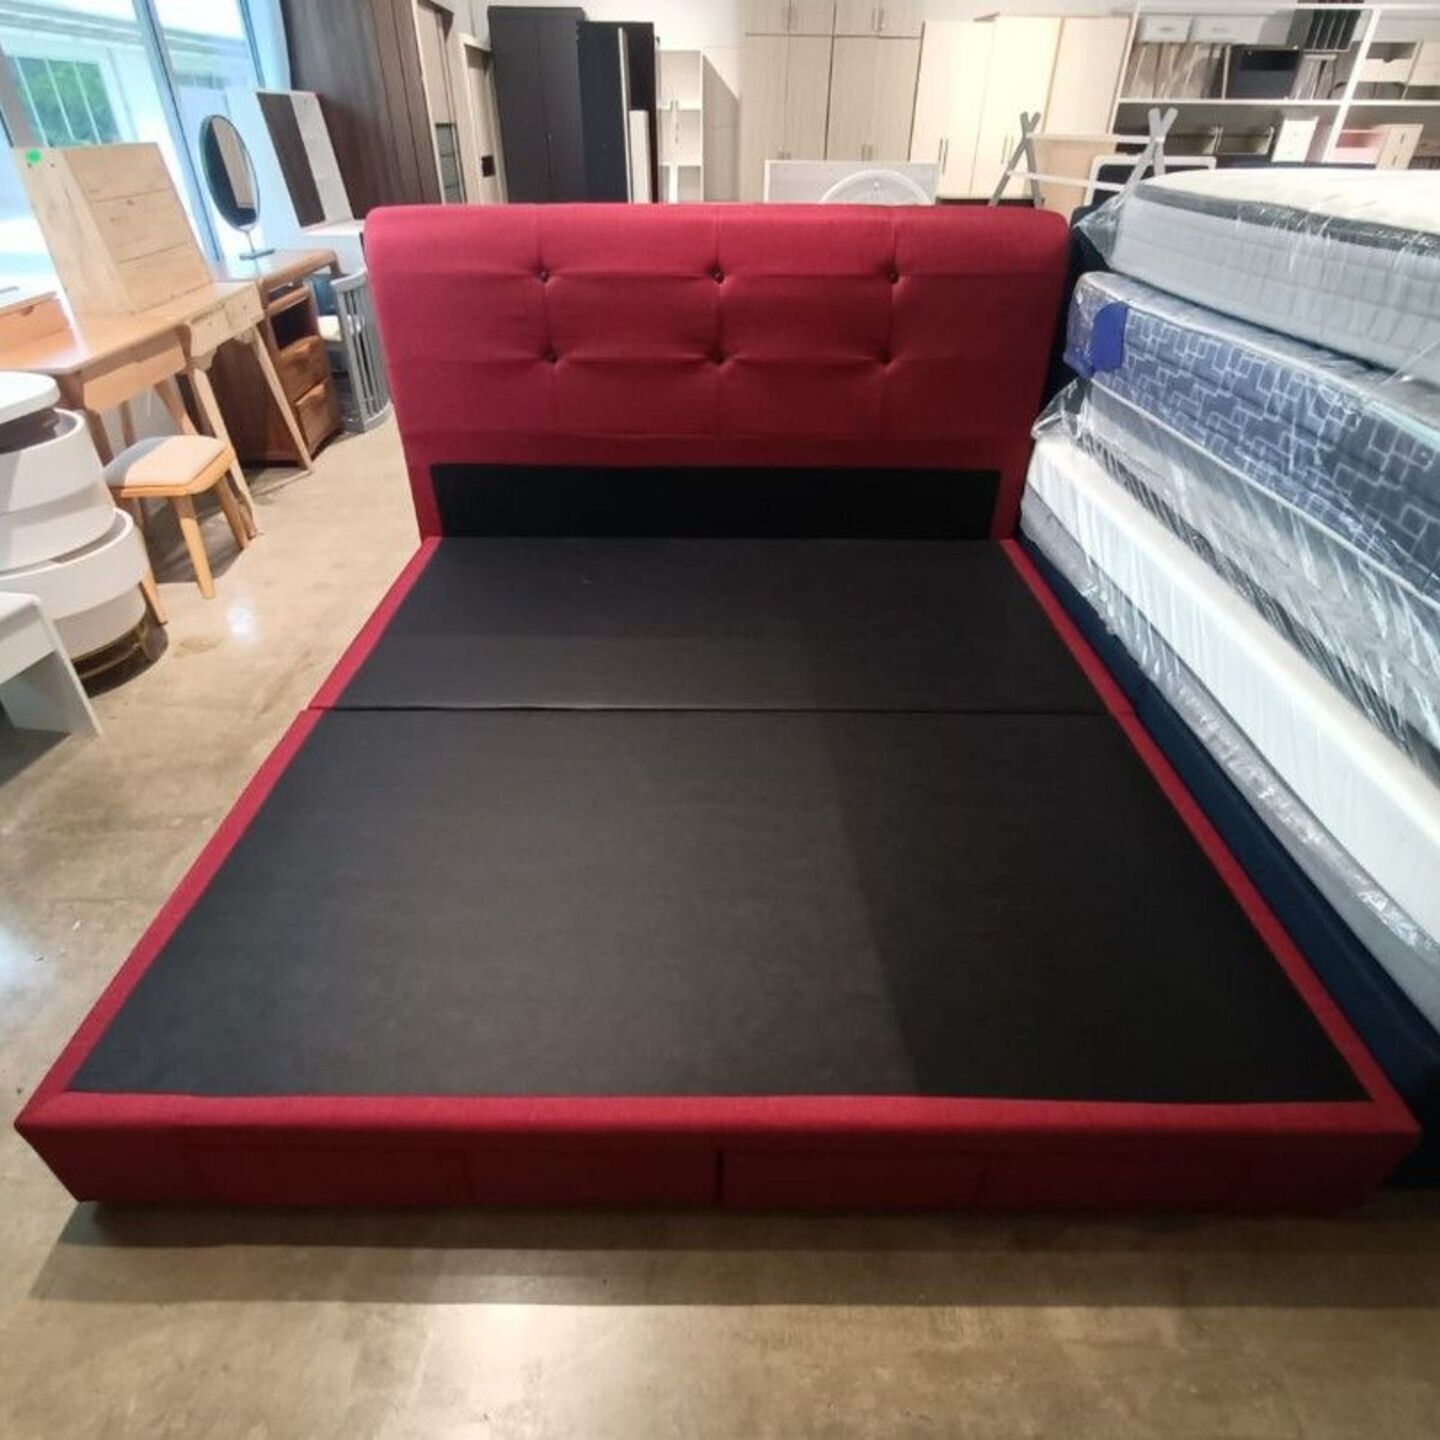 FOBRIX KING Size Fabric Bedframe with Drawers in RED